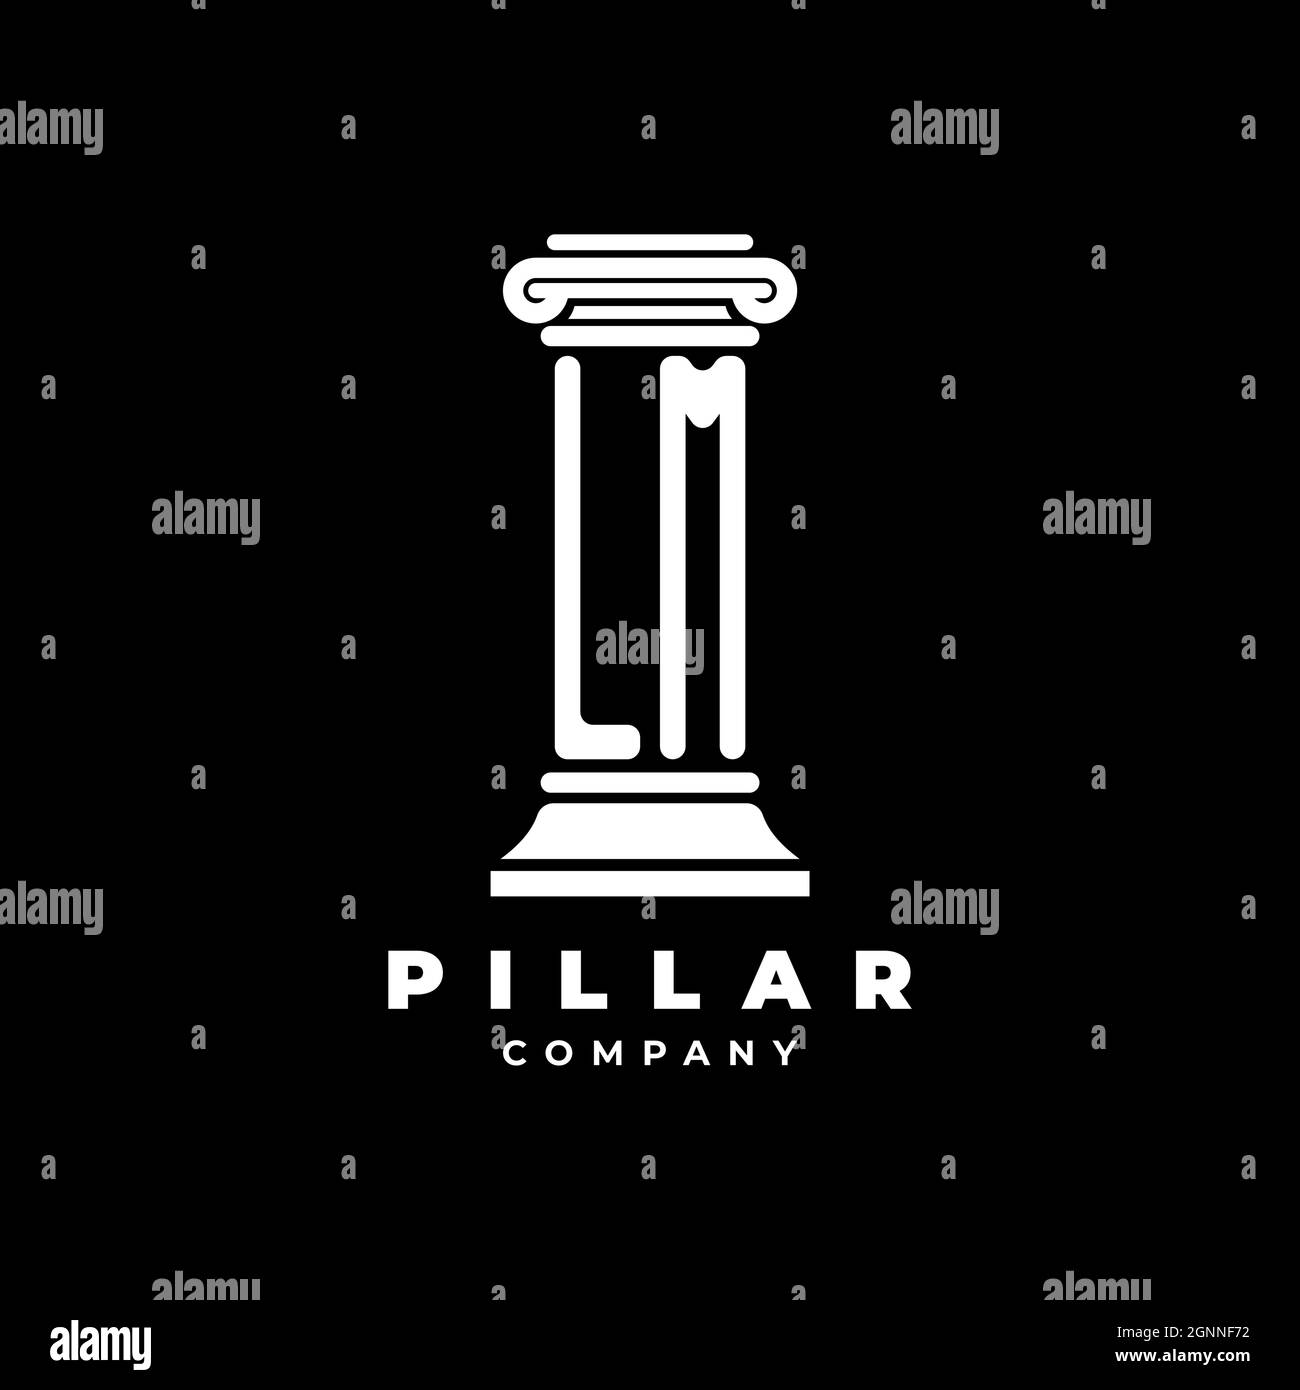 LM Monogram Logo Letter Pillars shape lawyer style vector, law firm company isolated in black background Stock Vector